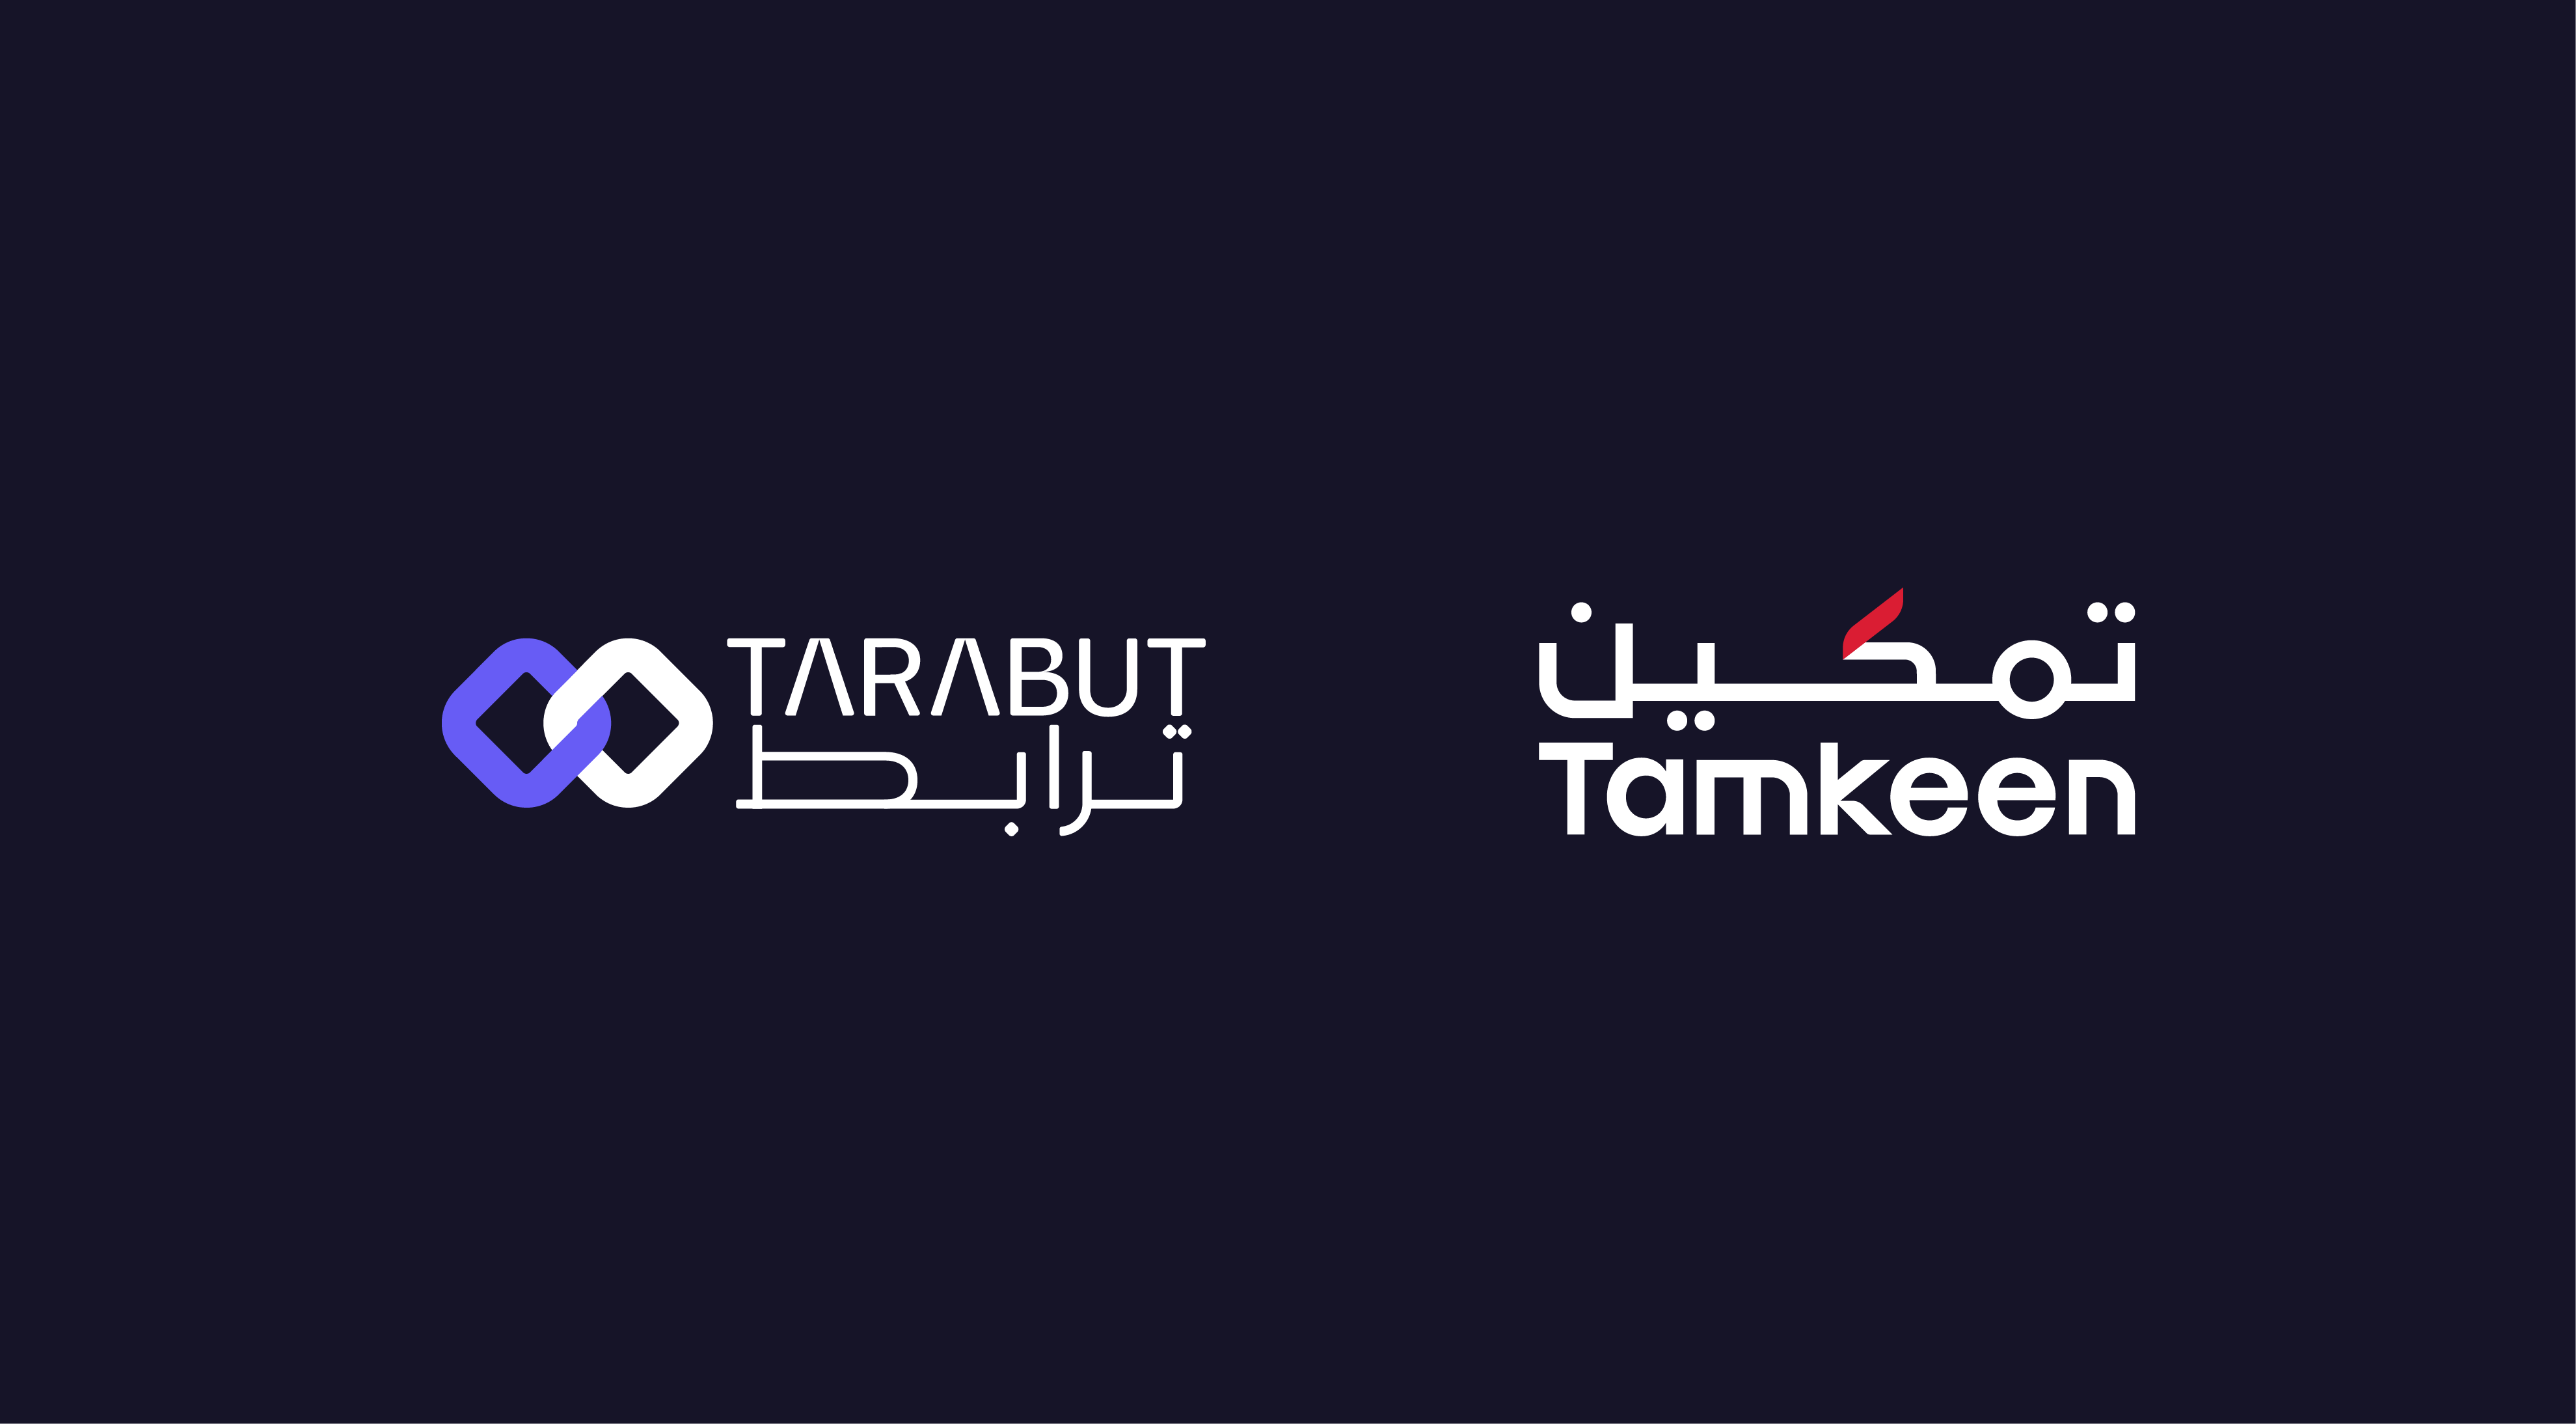 Tamkeen pioneers government open banking services through collaboration with Tarabut